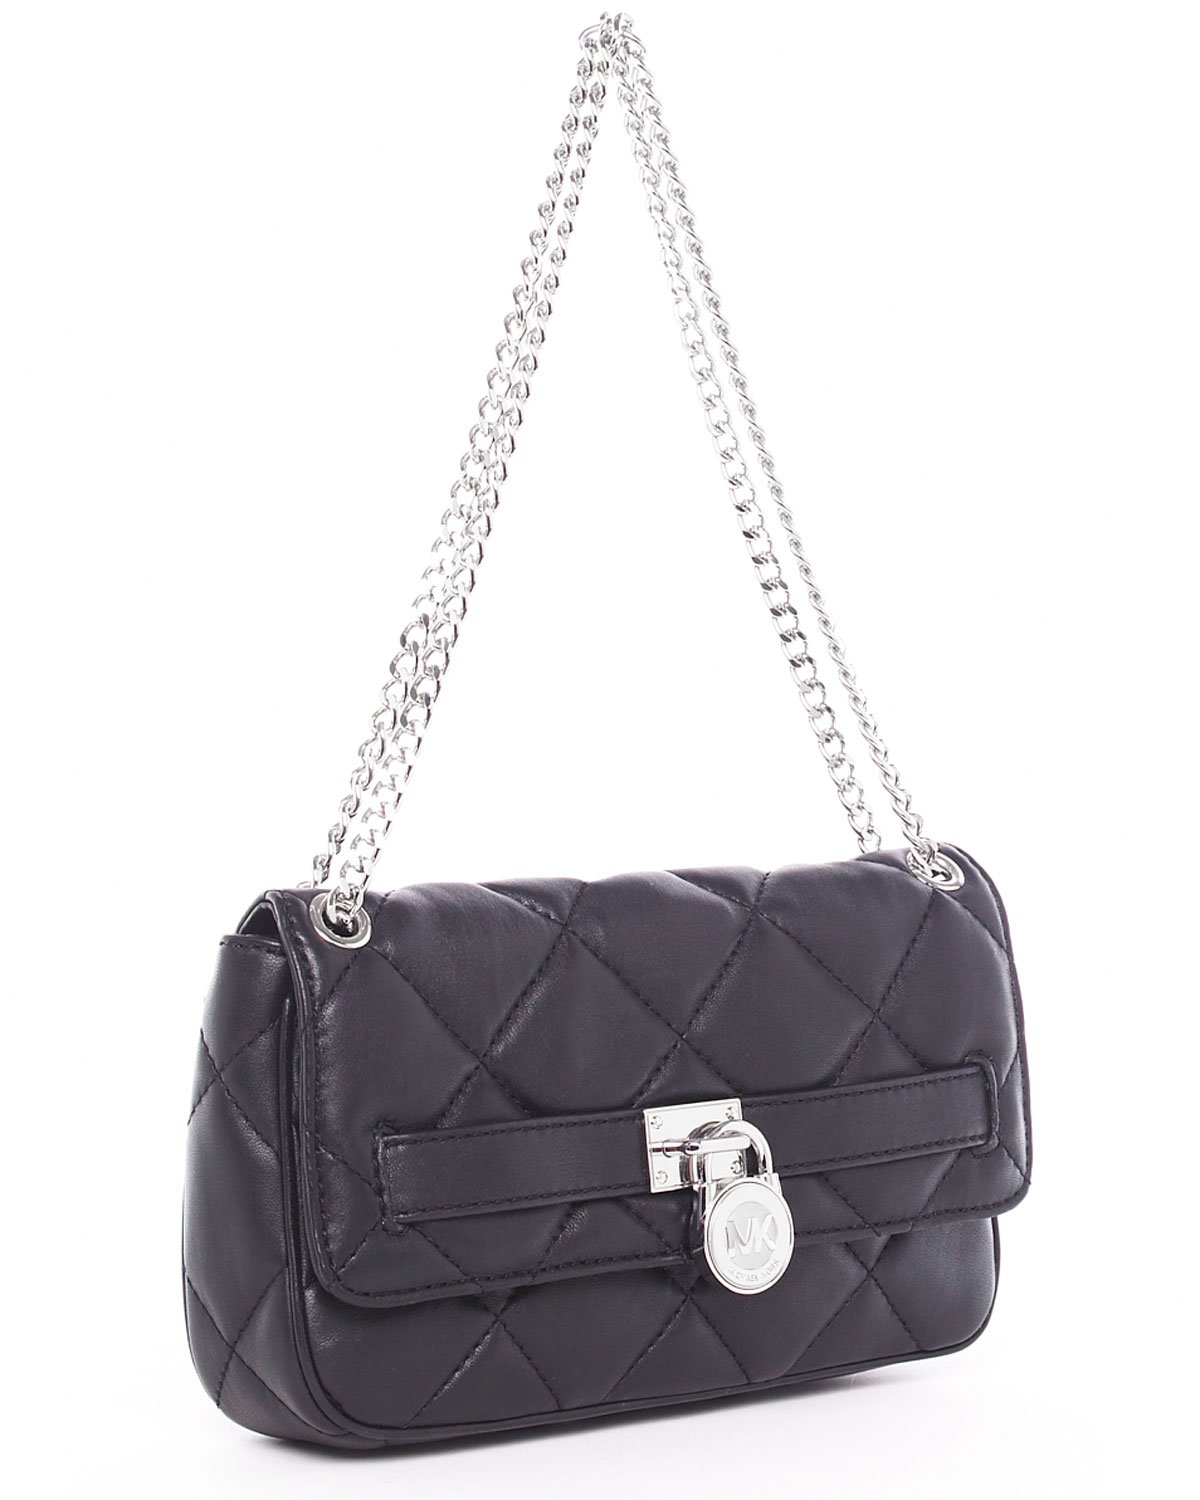 michael kors quilted hamilton